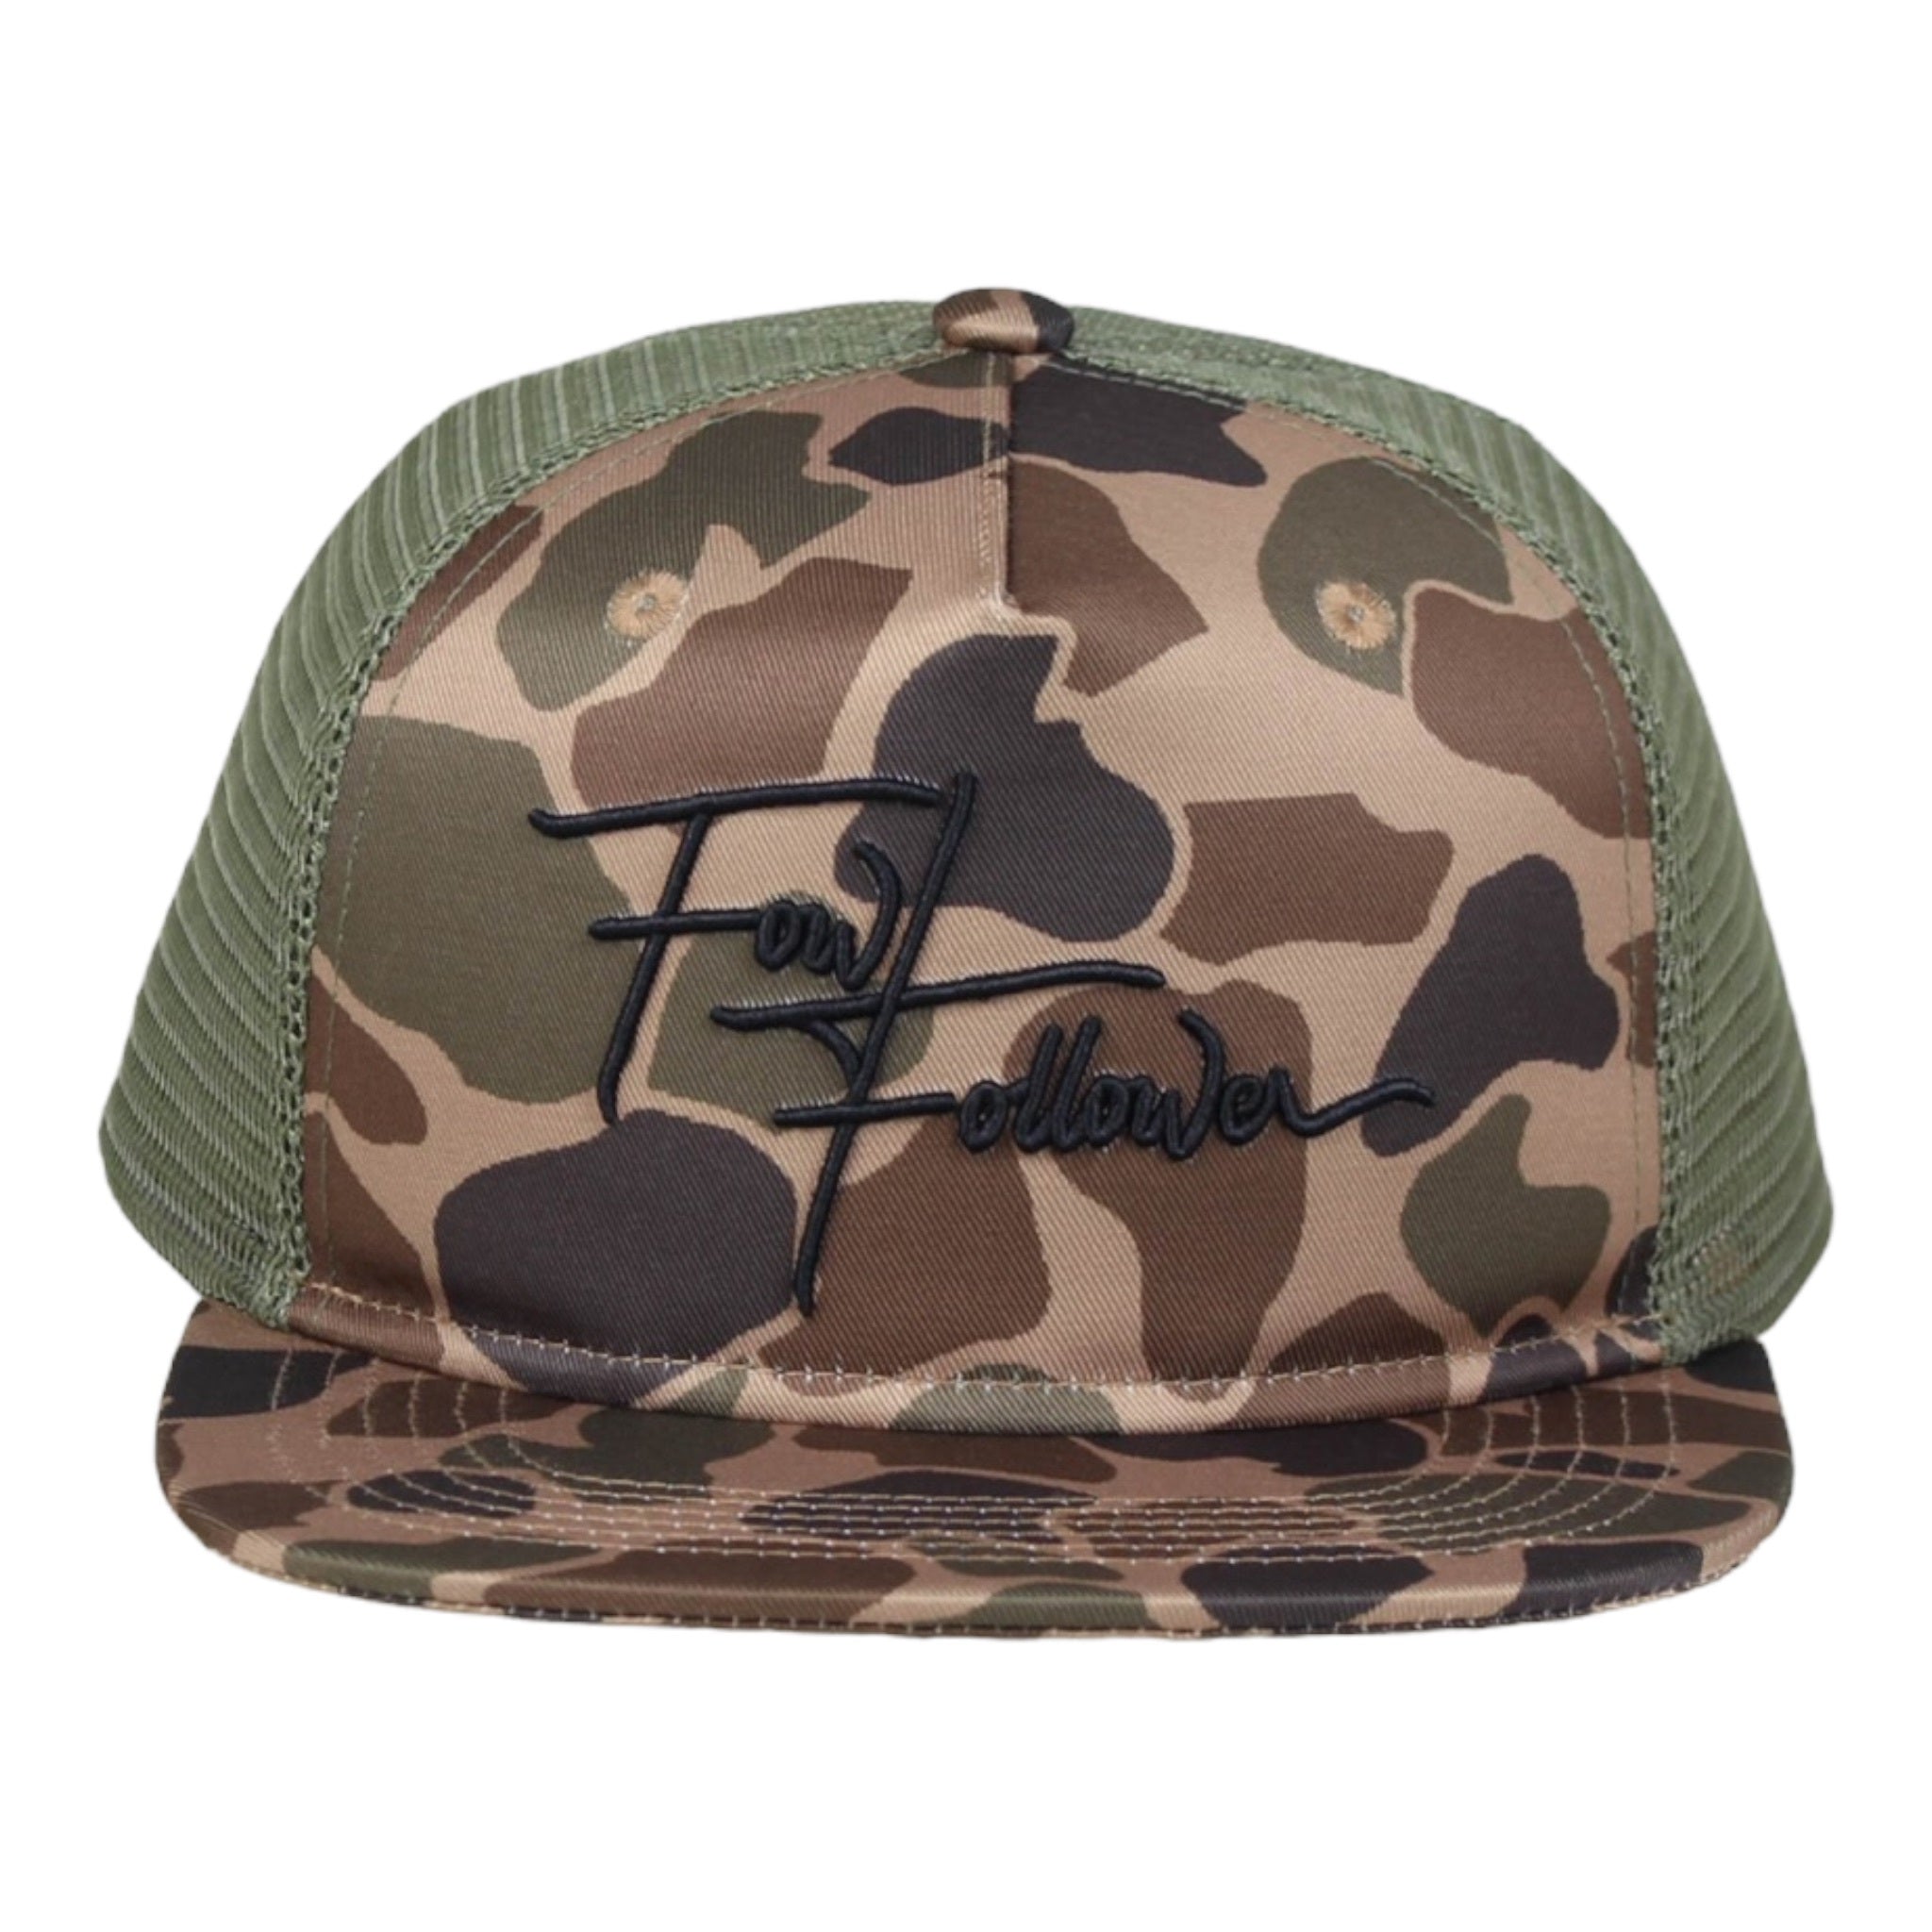 A Fowl Follower Favorite Camo Hat with the word fearless on it.